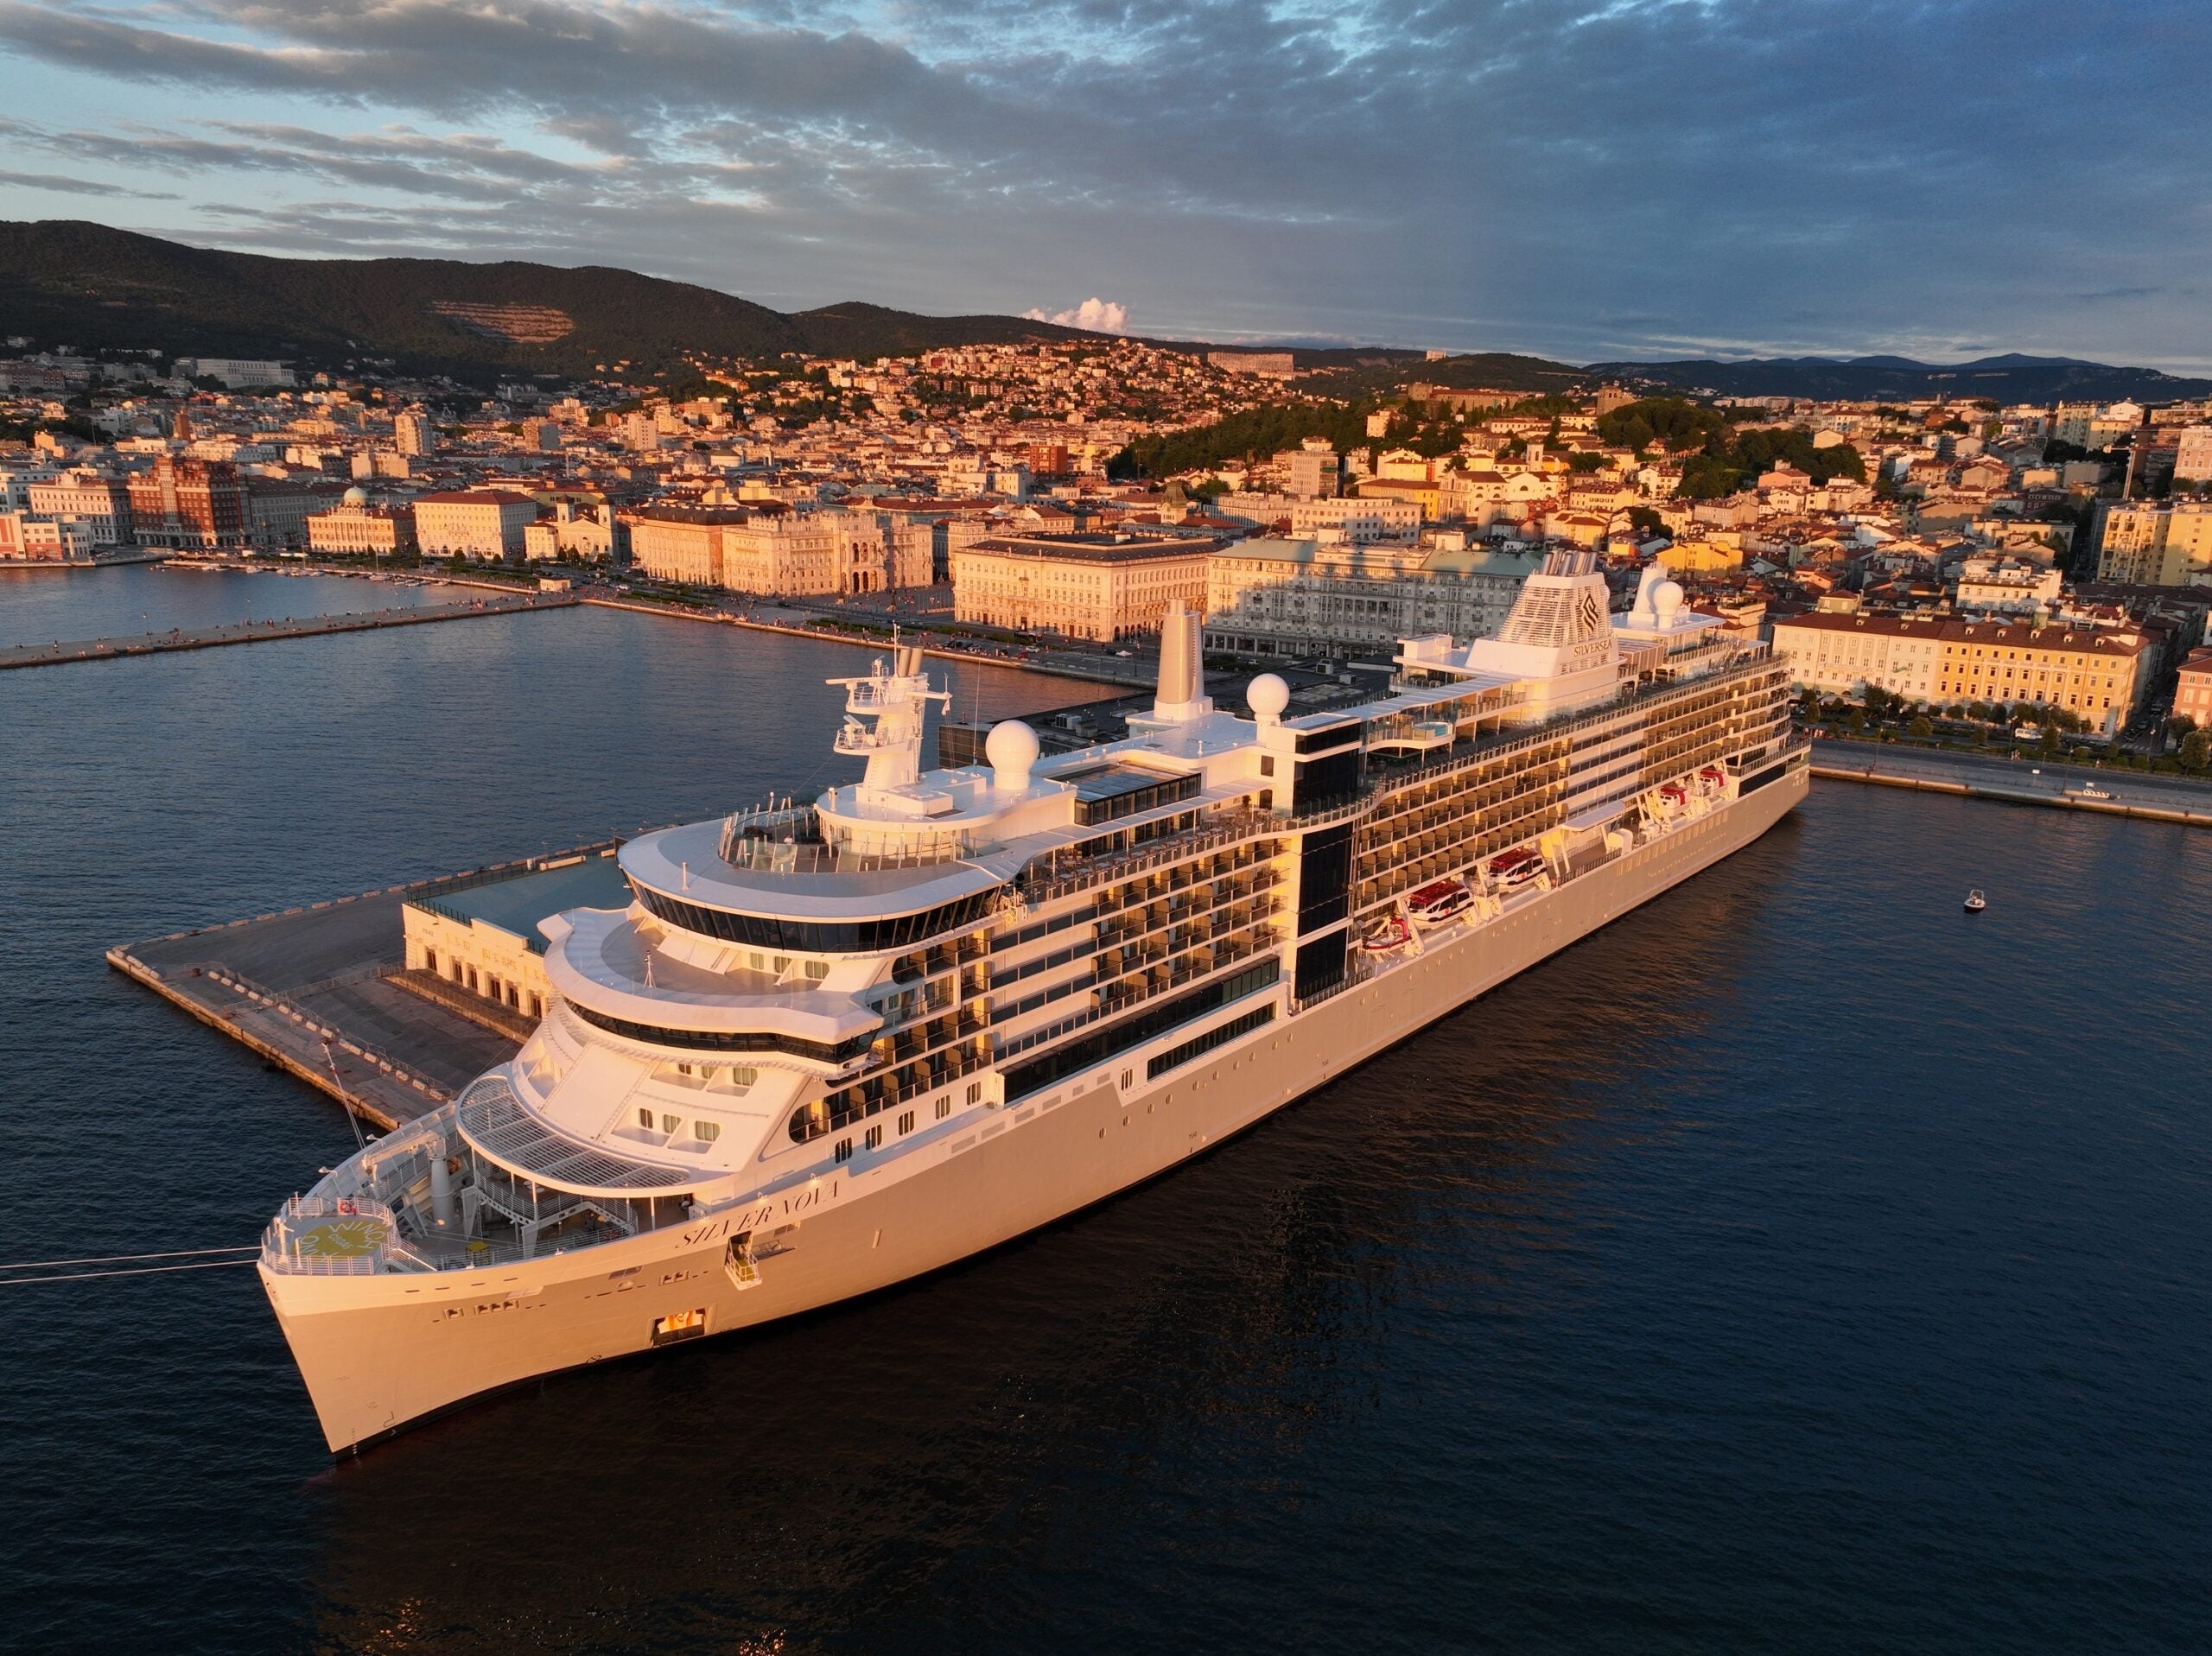 The luxury cruise wars heat up with the arrival of a swanky new ship ...